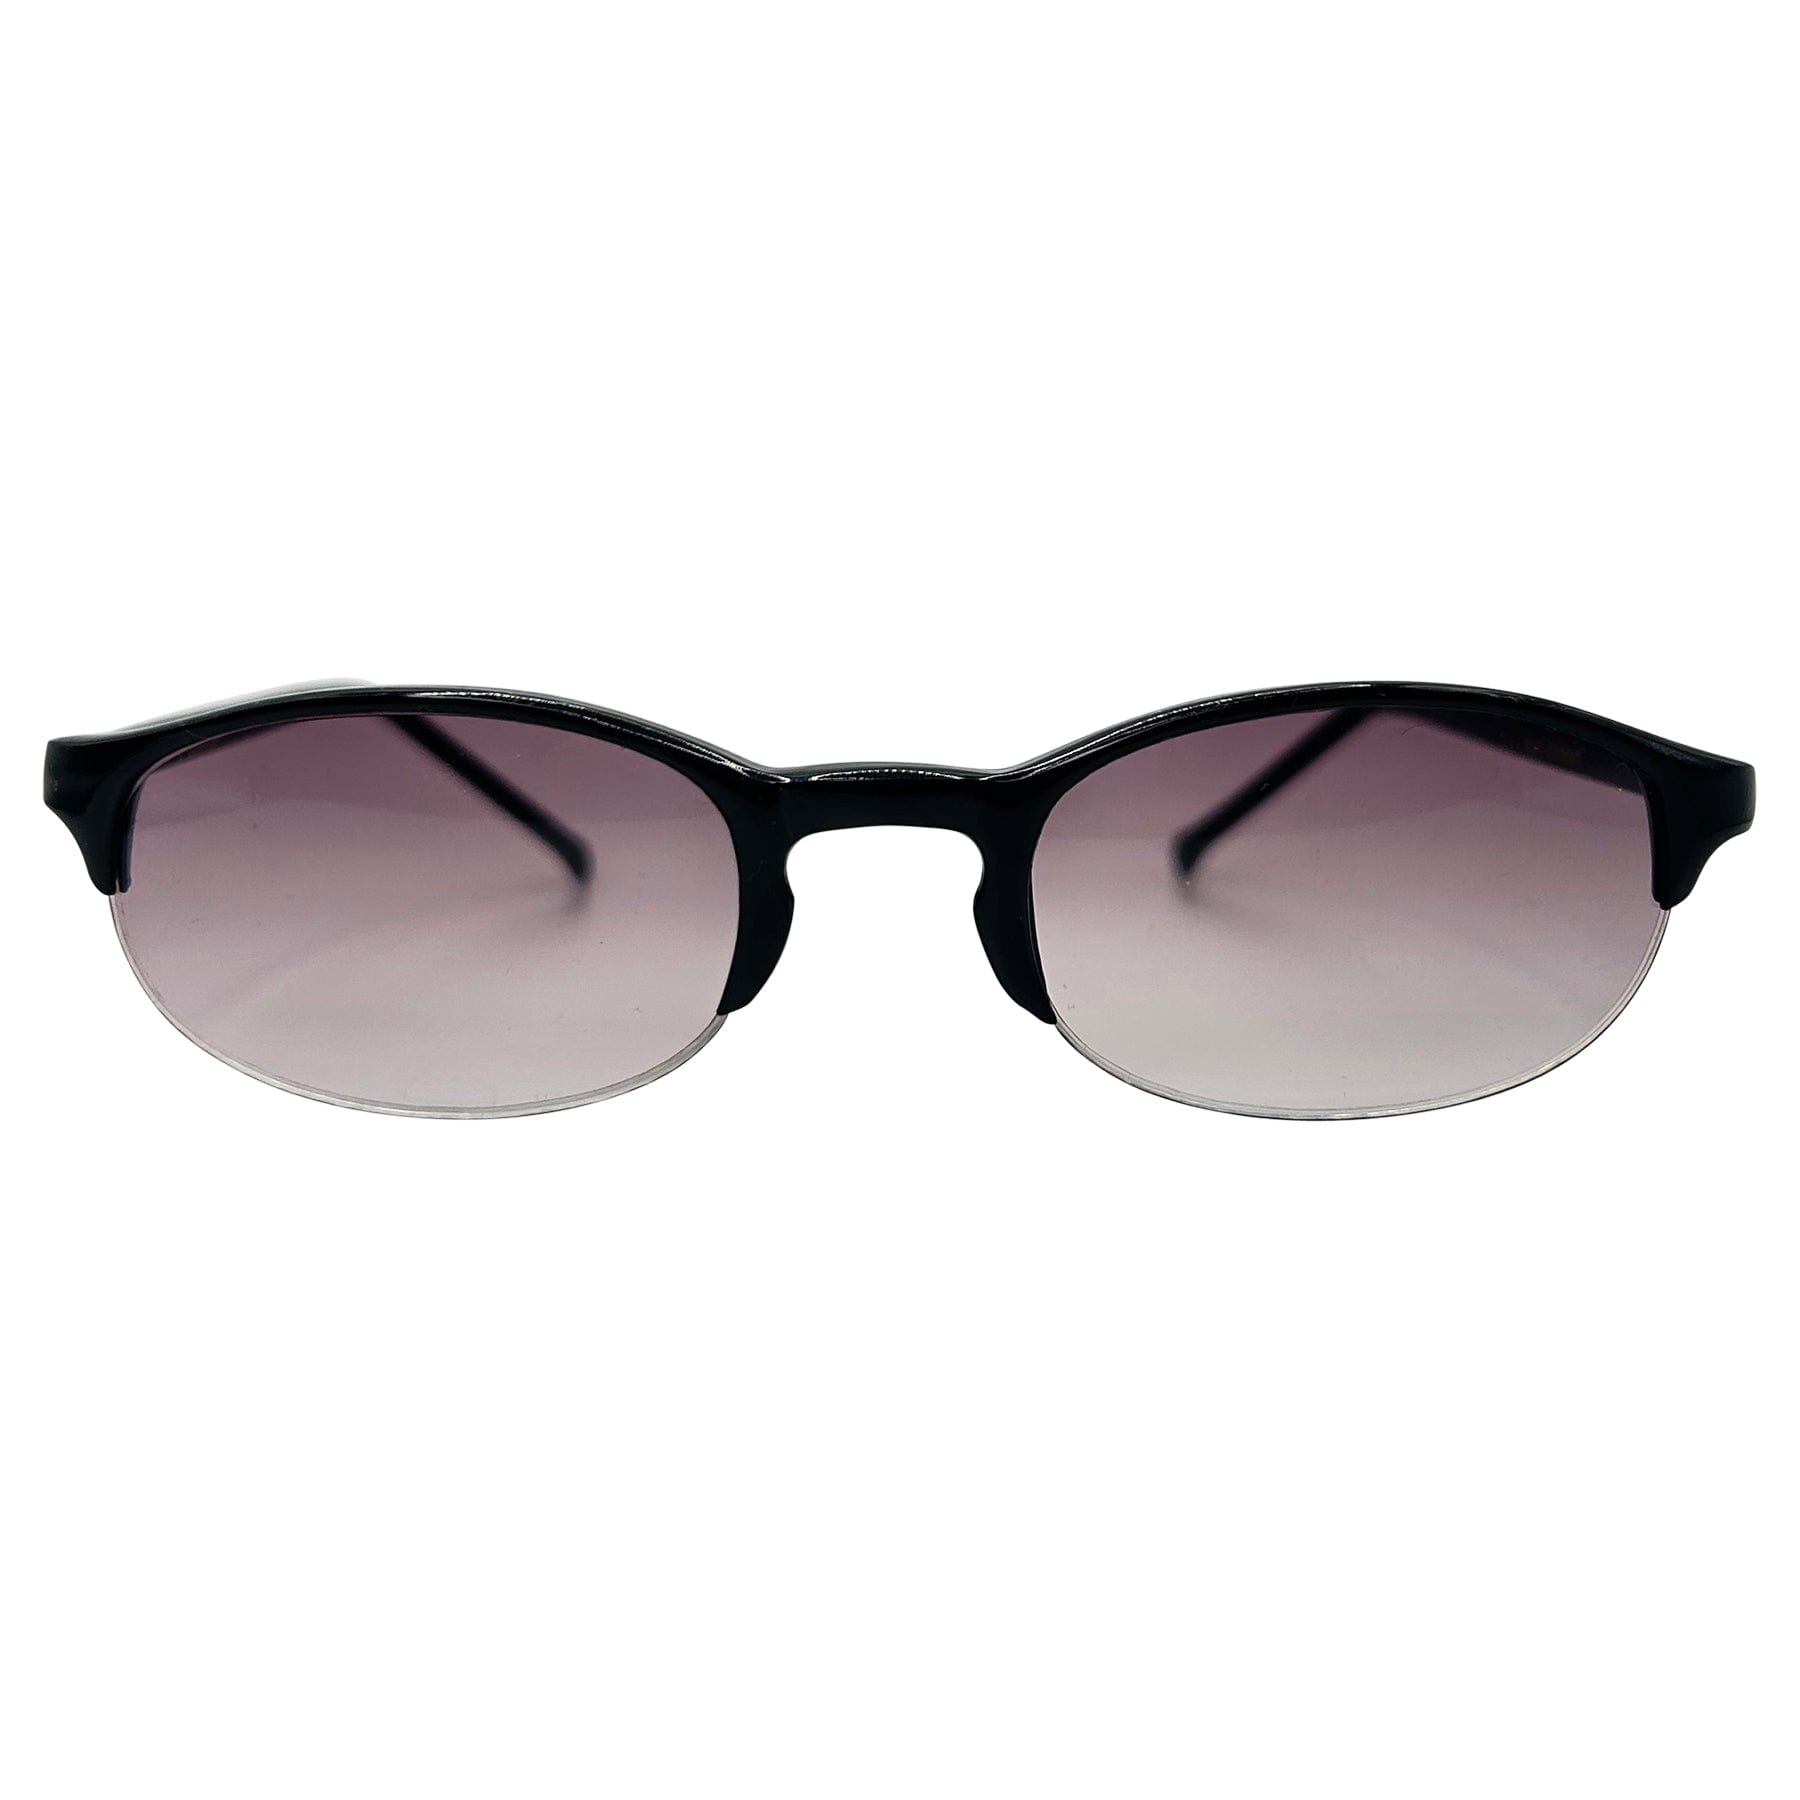 vintage 90s sunglasses with a smoke lens and gloss black round frame